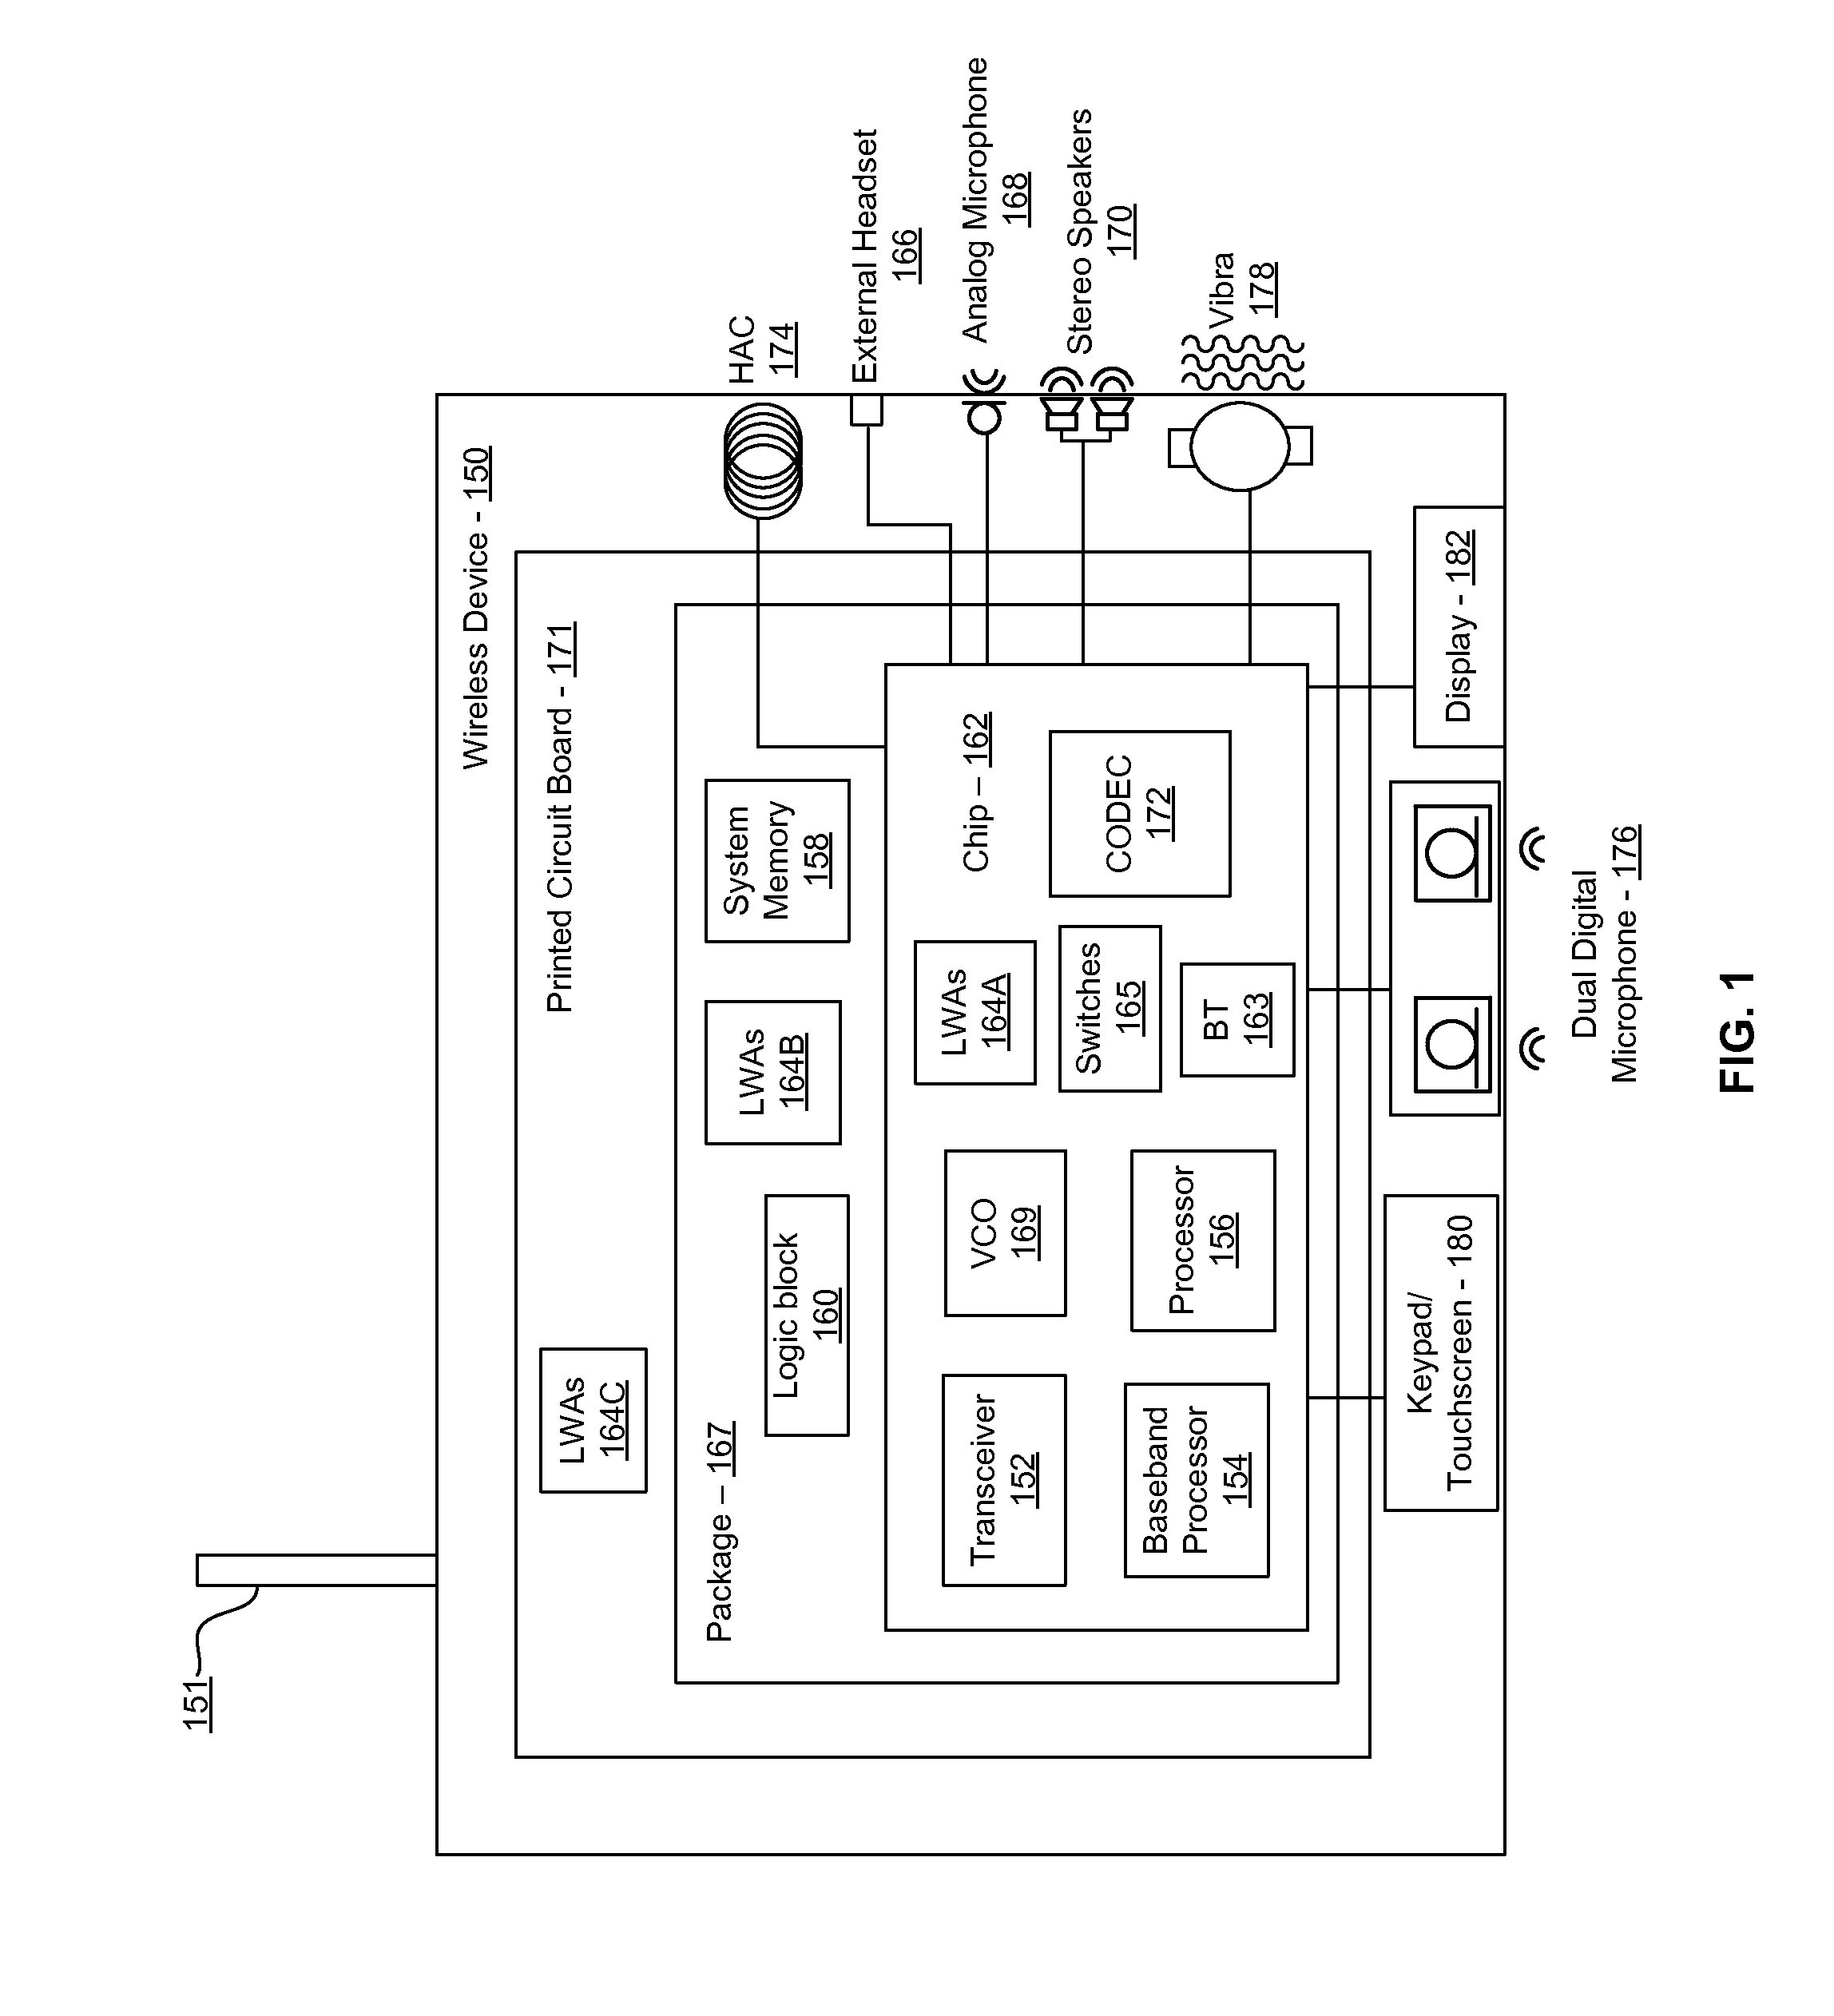 Method and system for clock distribution utilizing leaky wave antennas